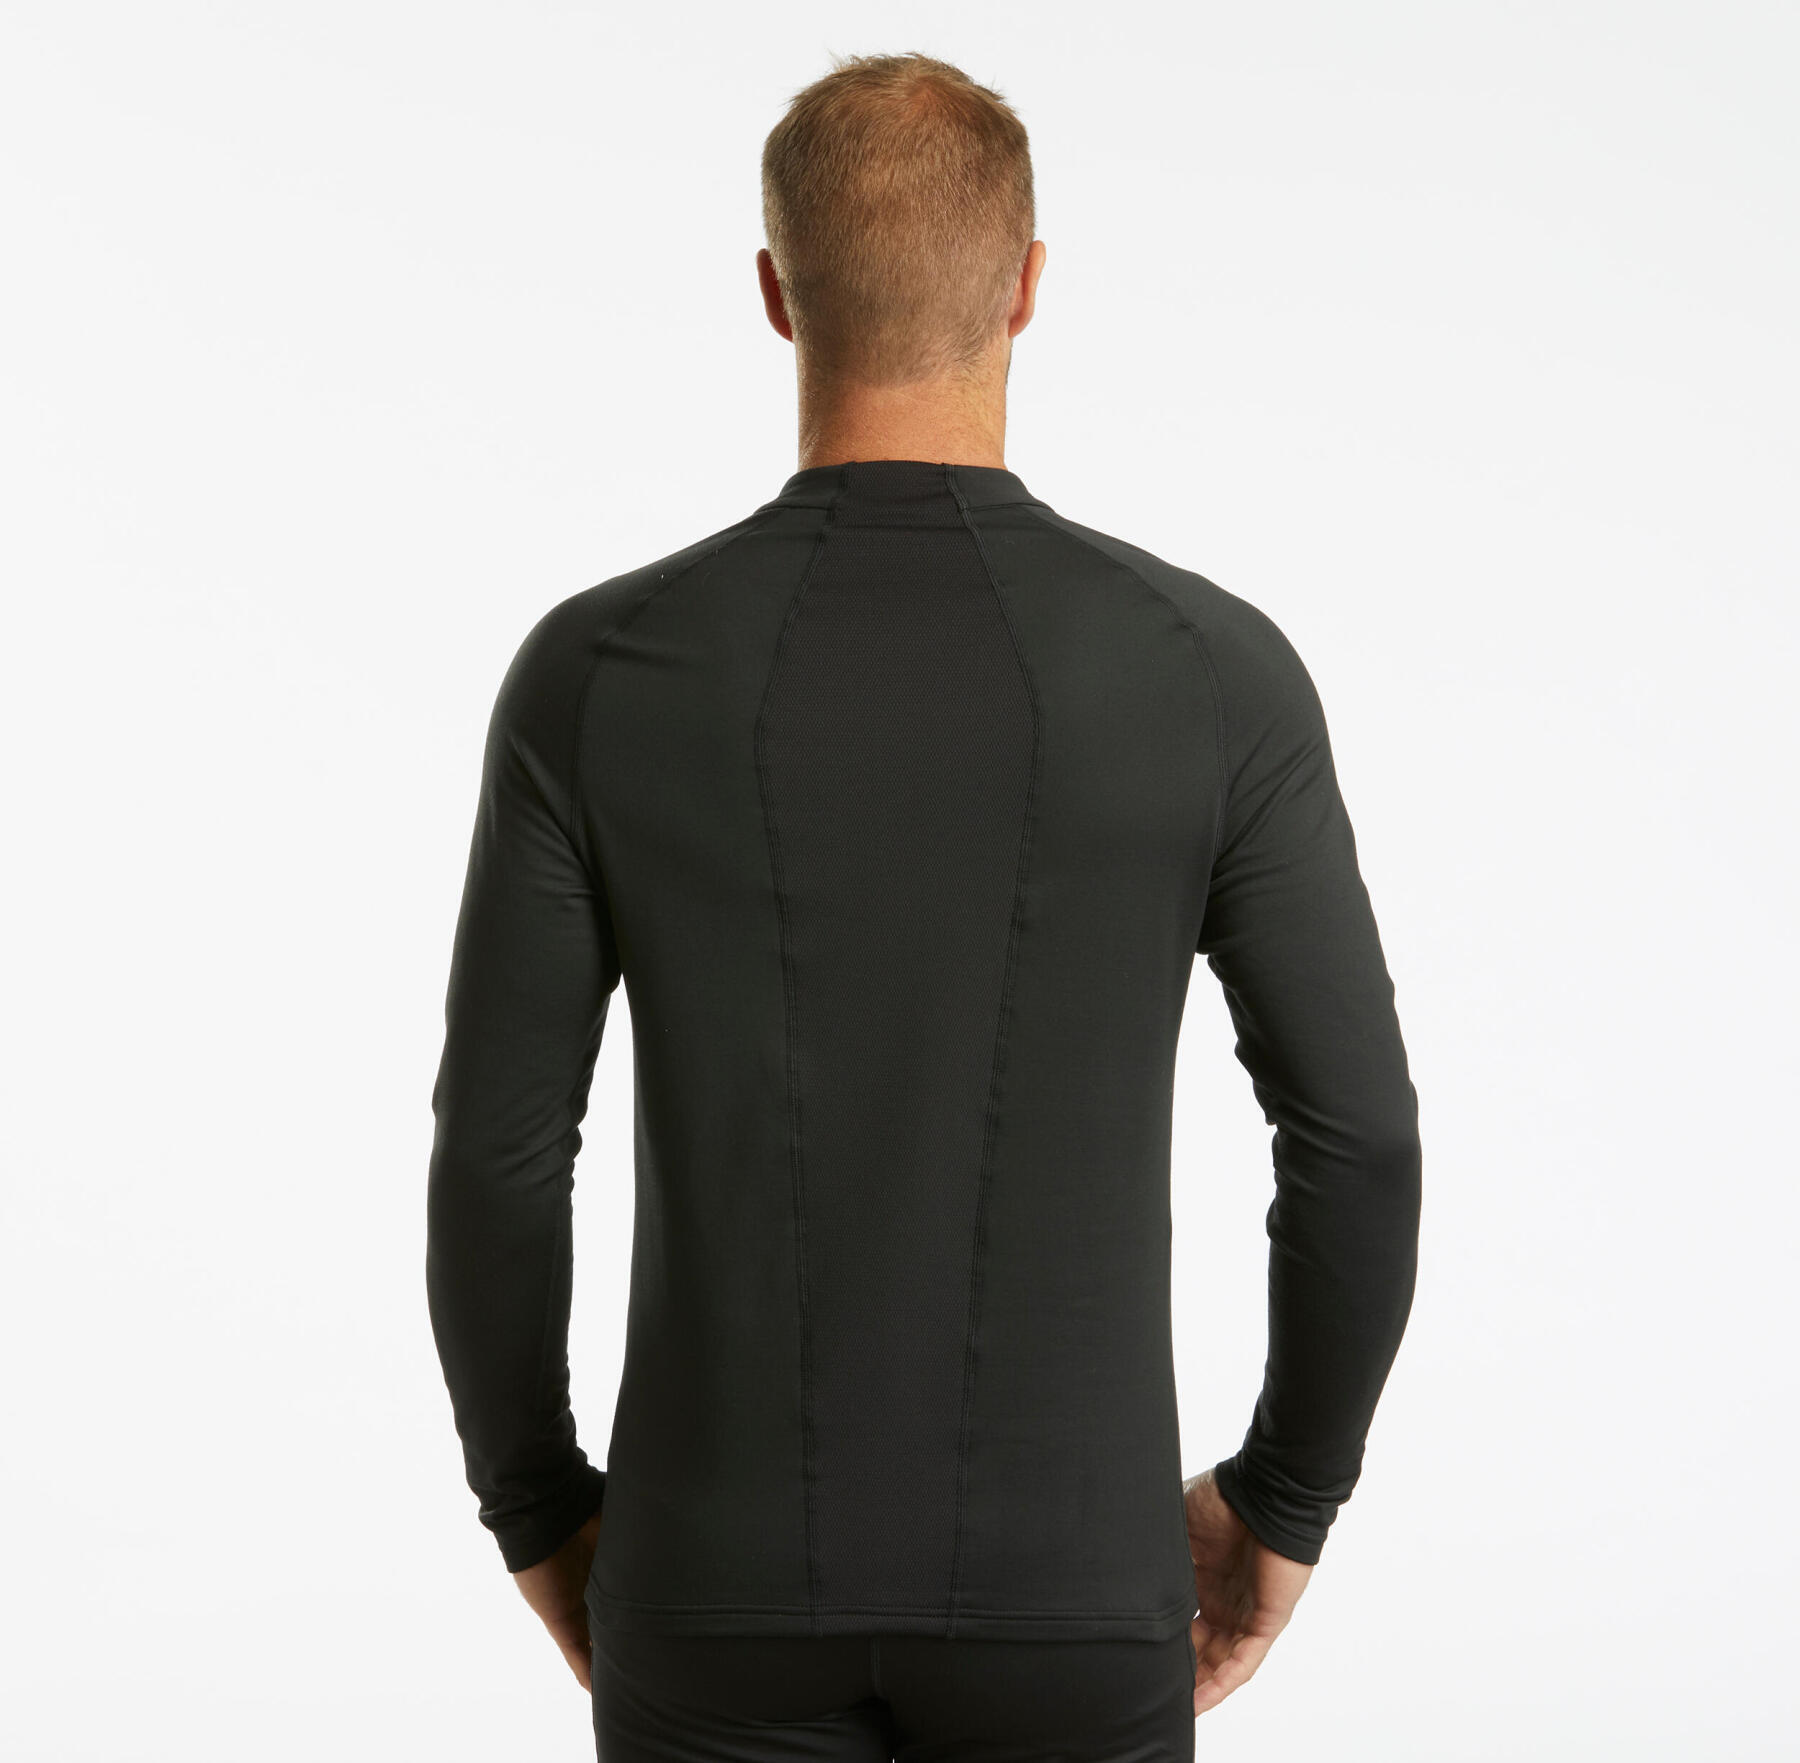 How to Choose Thermal Base Layers?